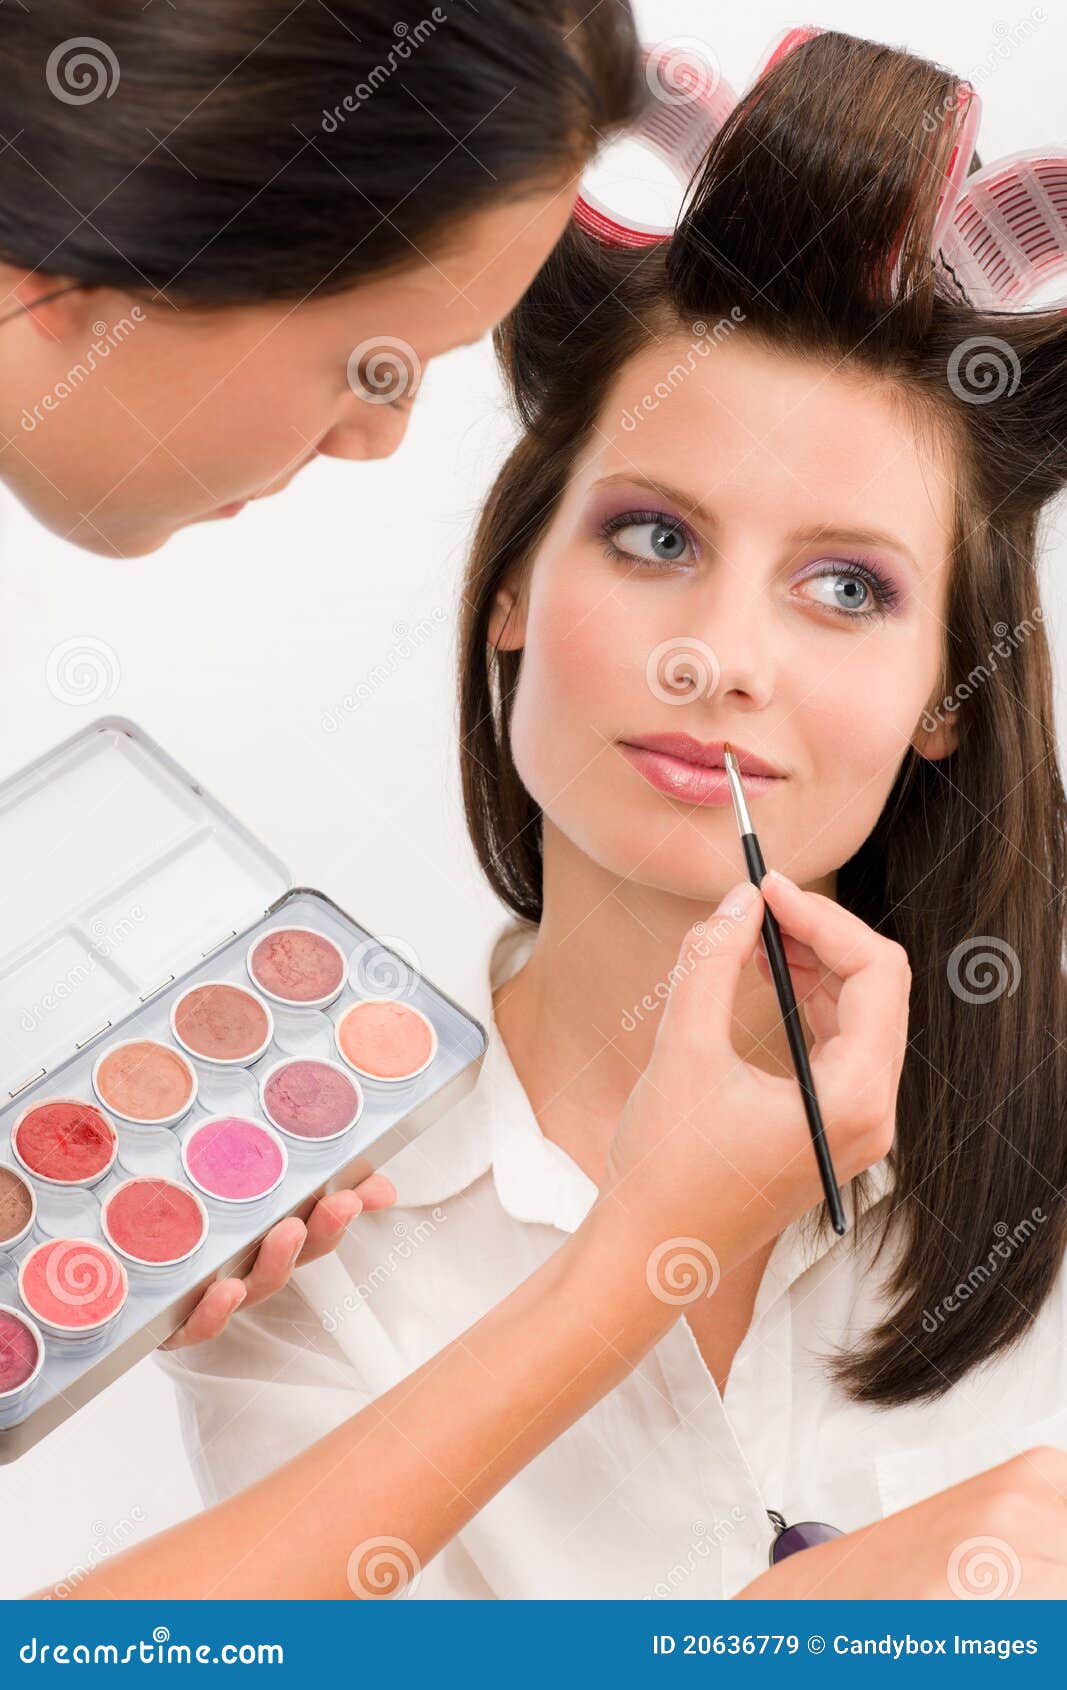 How to apply lipstick with brush